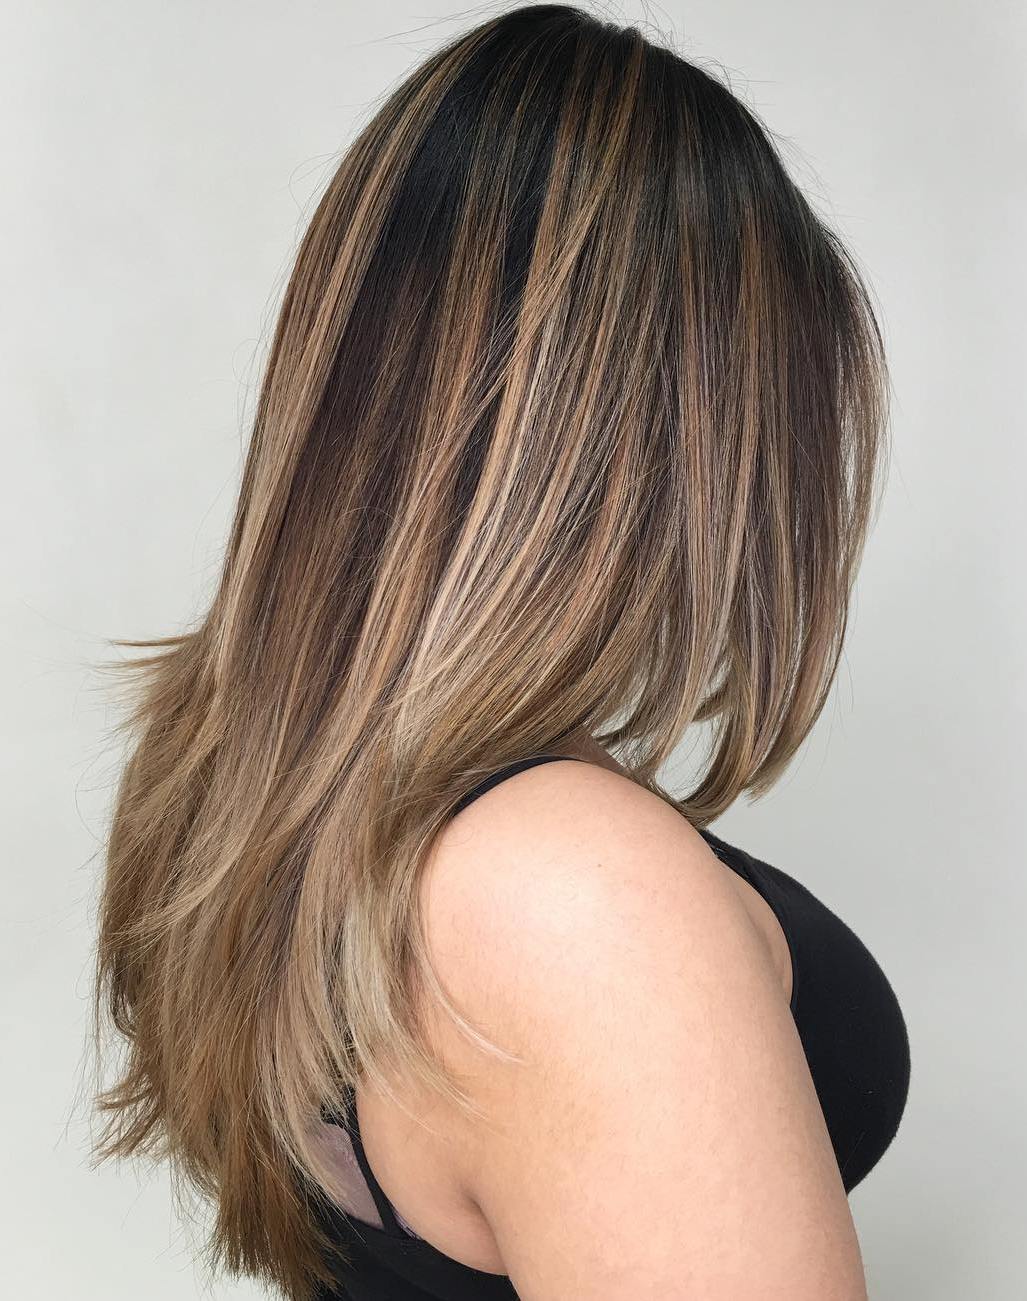 Straight Layered Hair With Cool-Toned Bronde Balayage